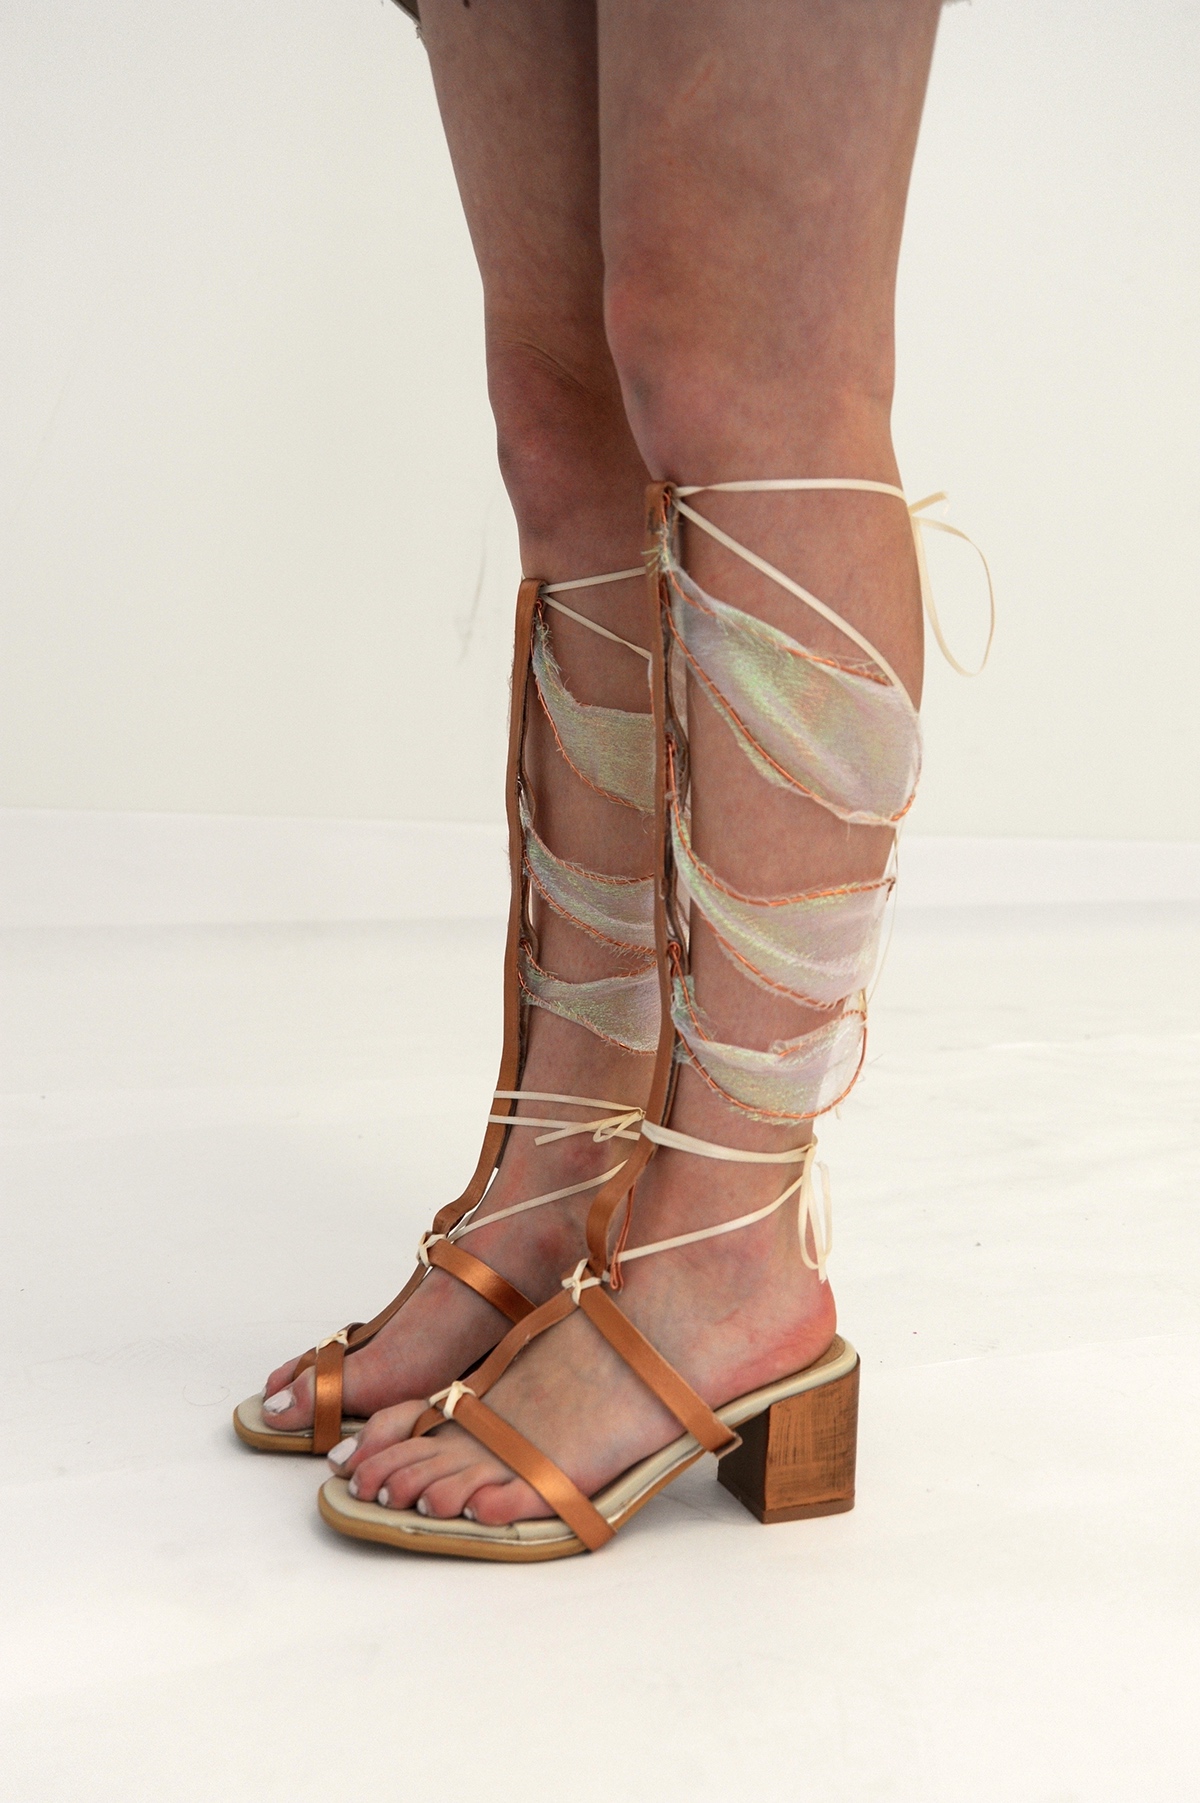 Gladiator Sandals shoes wire fabric Iridescence